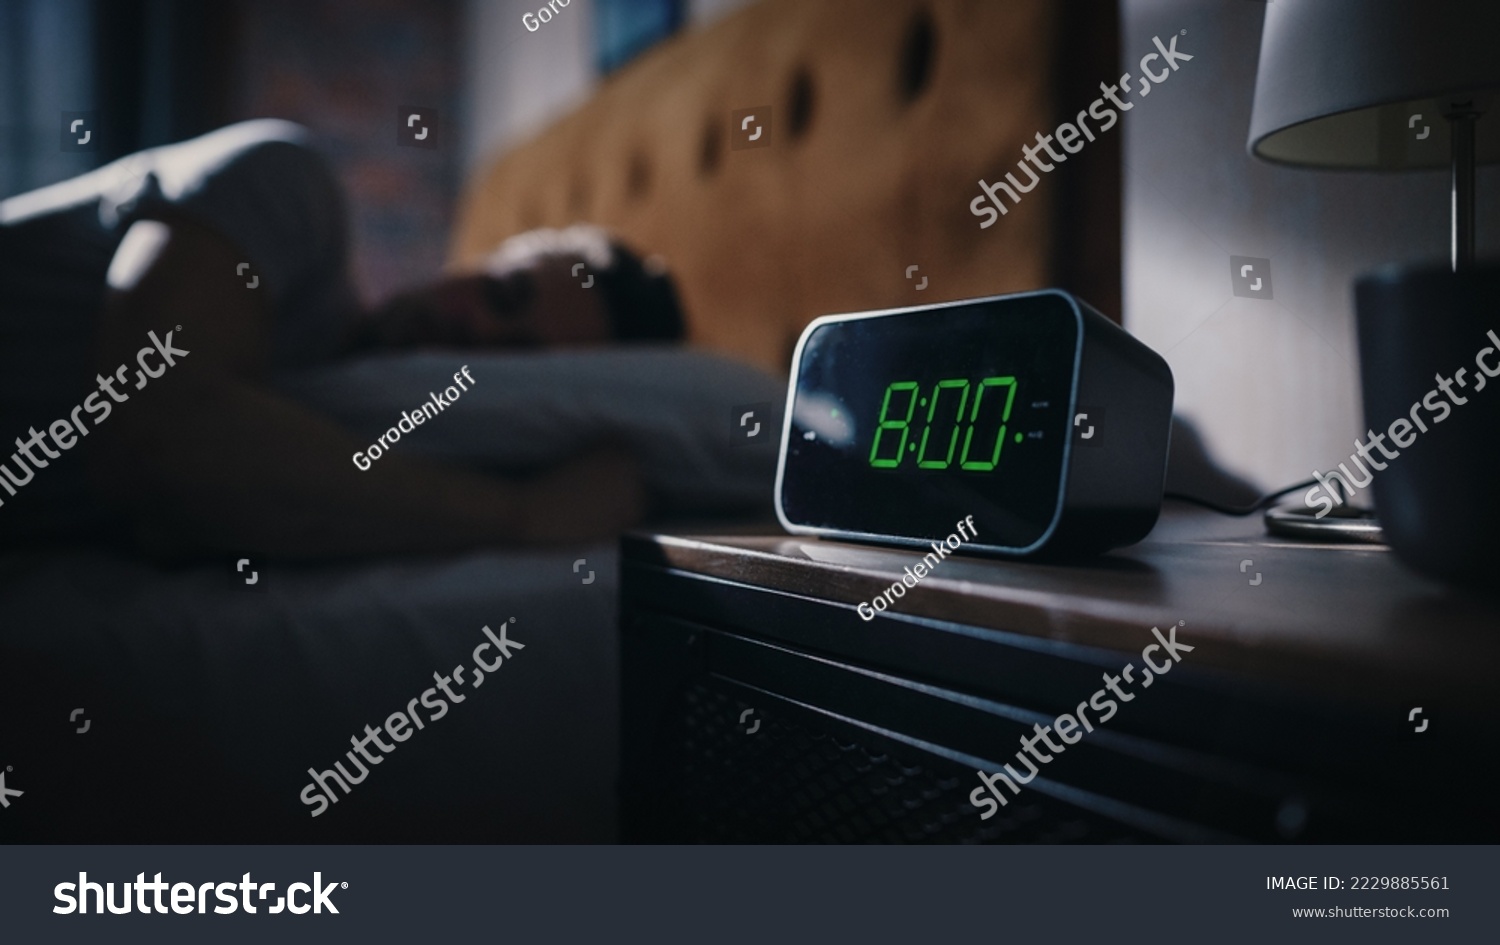 Man Wakes Up and Turns off Alarm Clock. Early Rising Productive Man Ready Start a Day of New Business Opportunities. Focus on the Clock Showing Eight O'Clock on Bedside Nightstand bedroom Apartment #2229885561